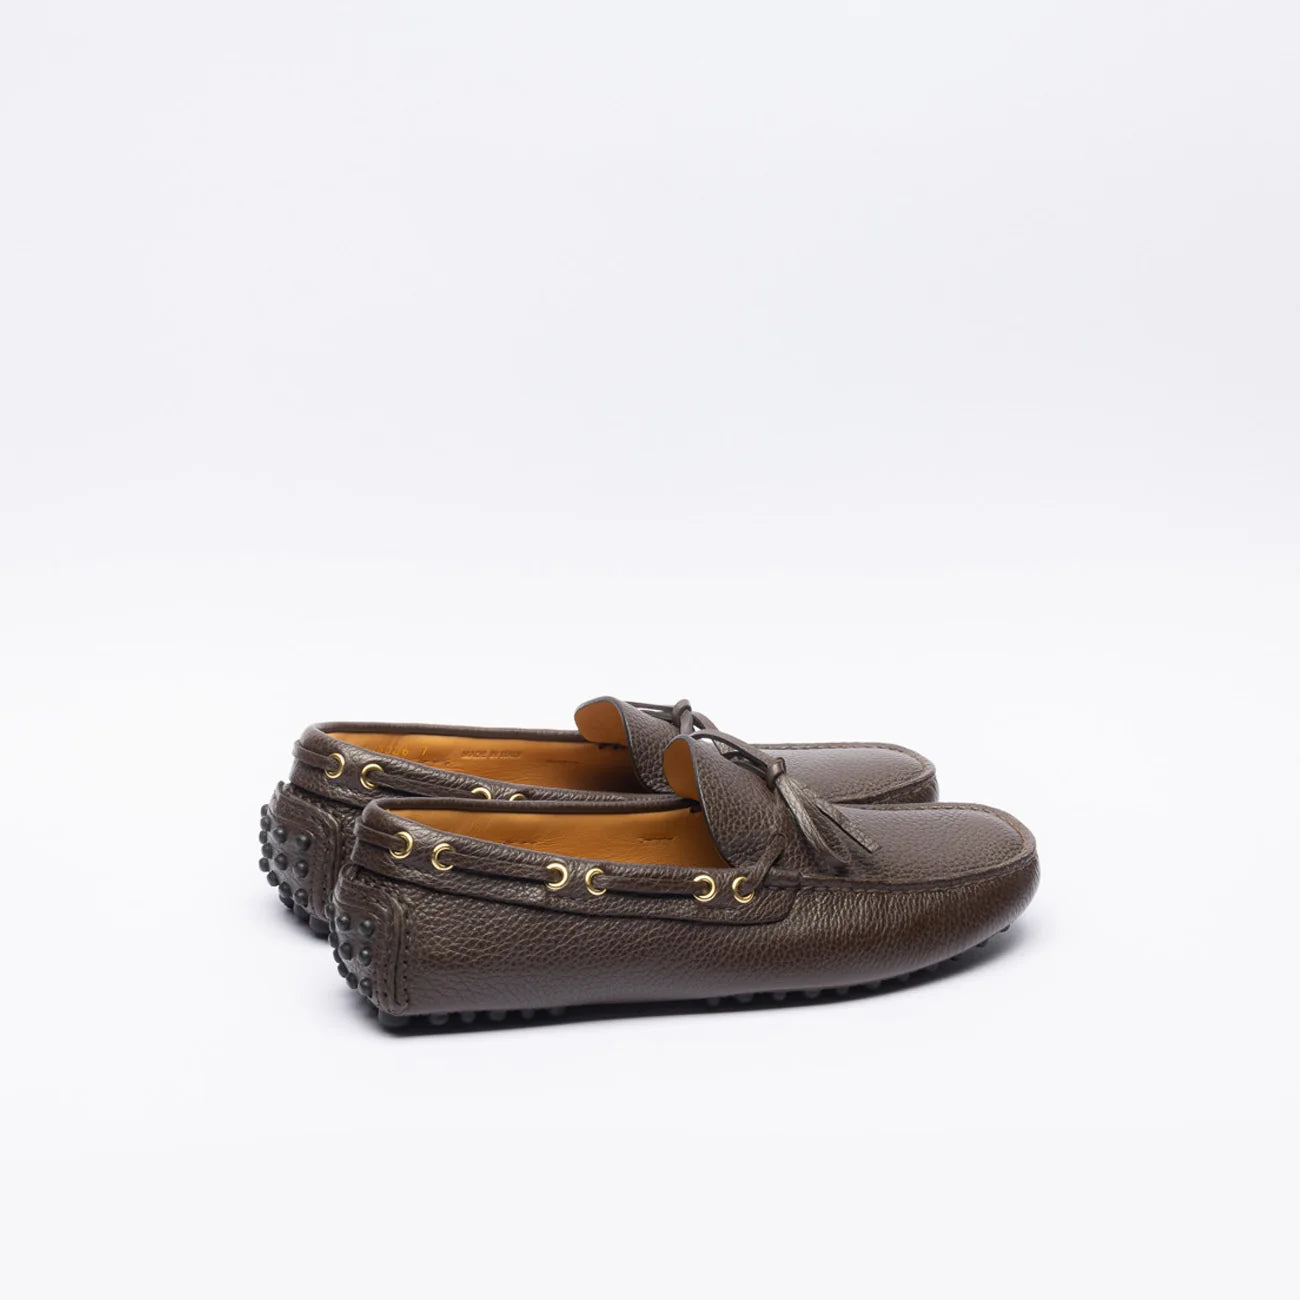 Car Shoe Driving KUD006 moccasin in brown leather